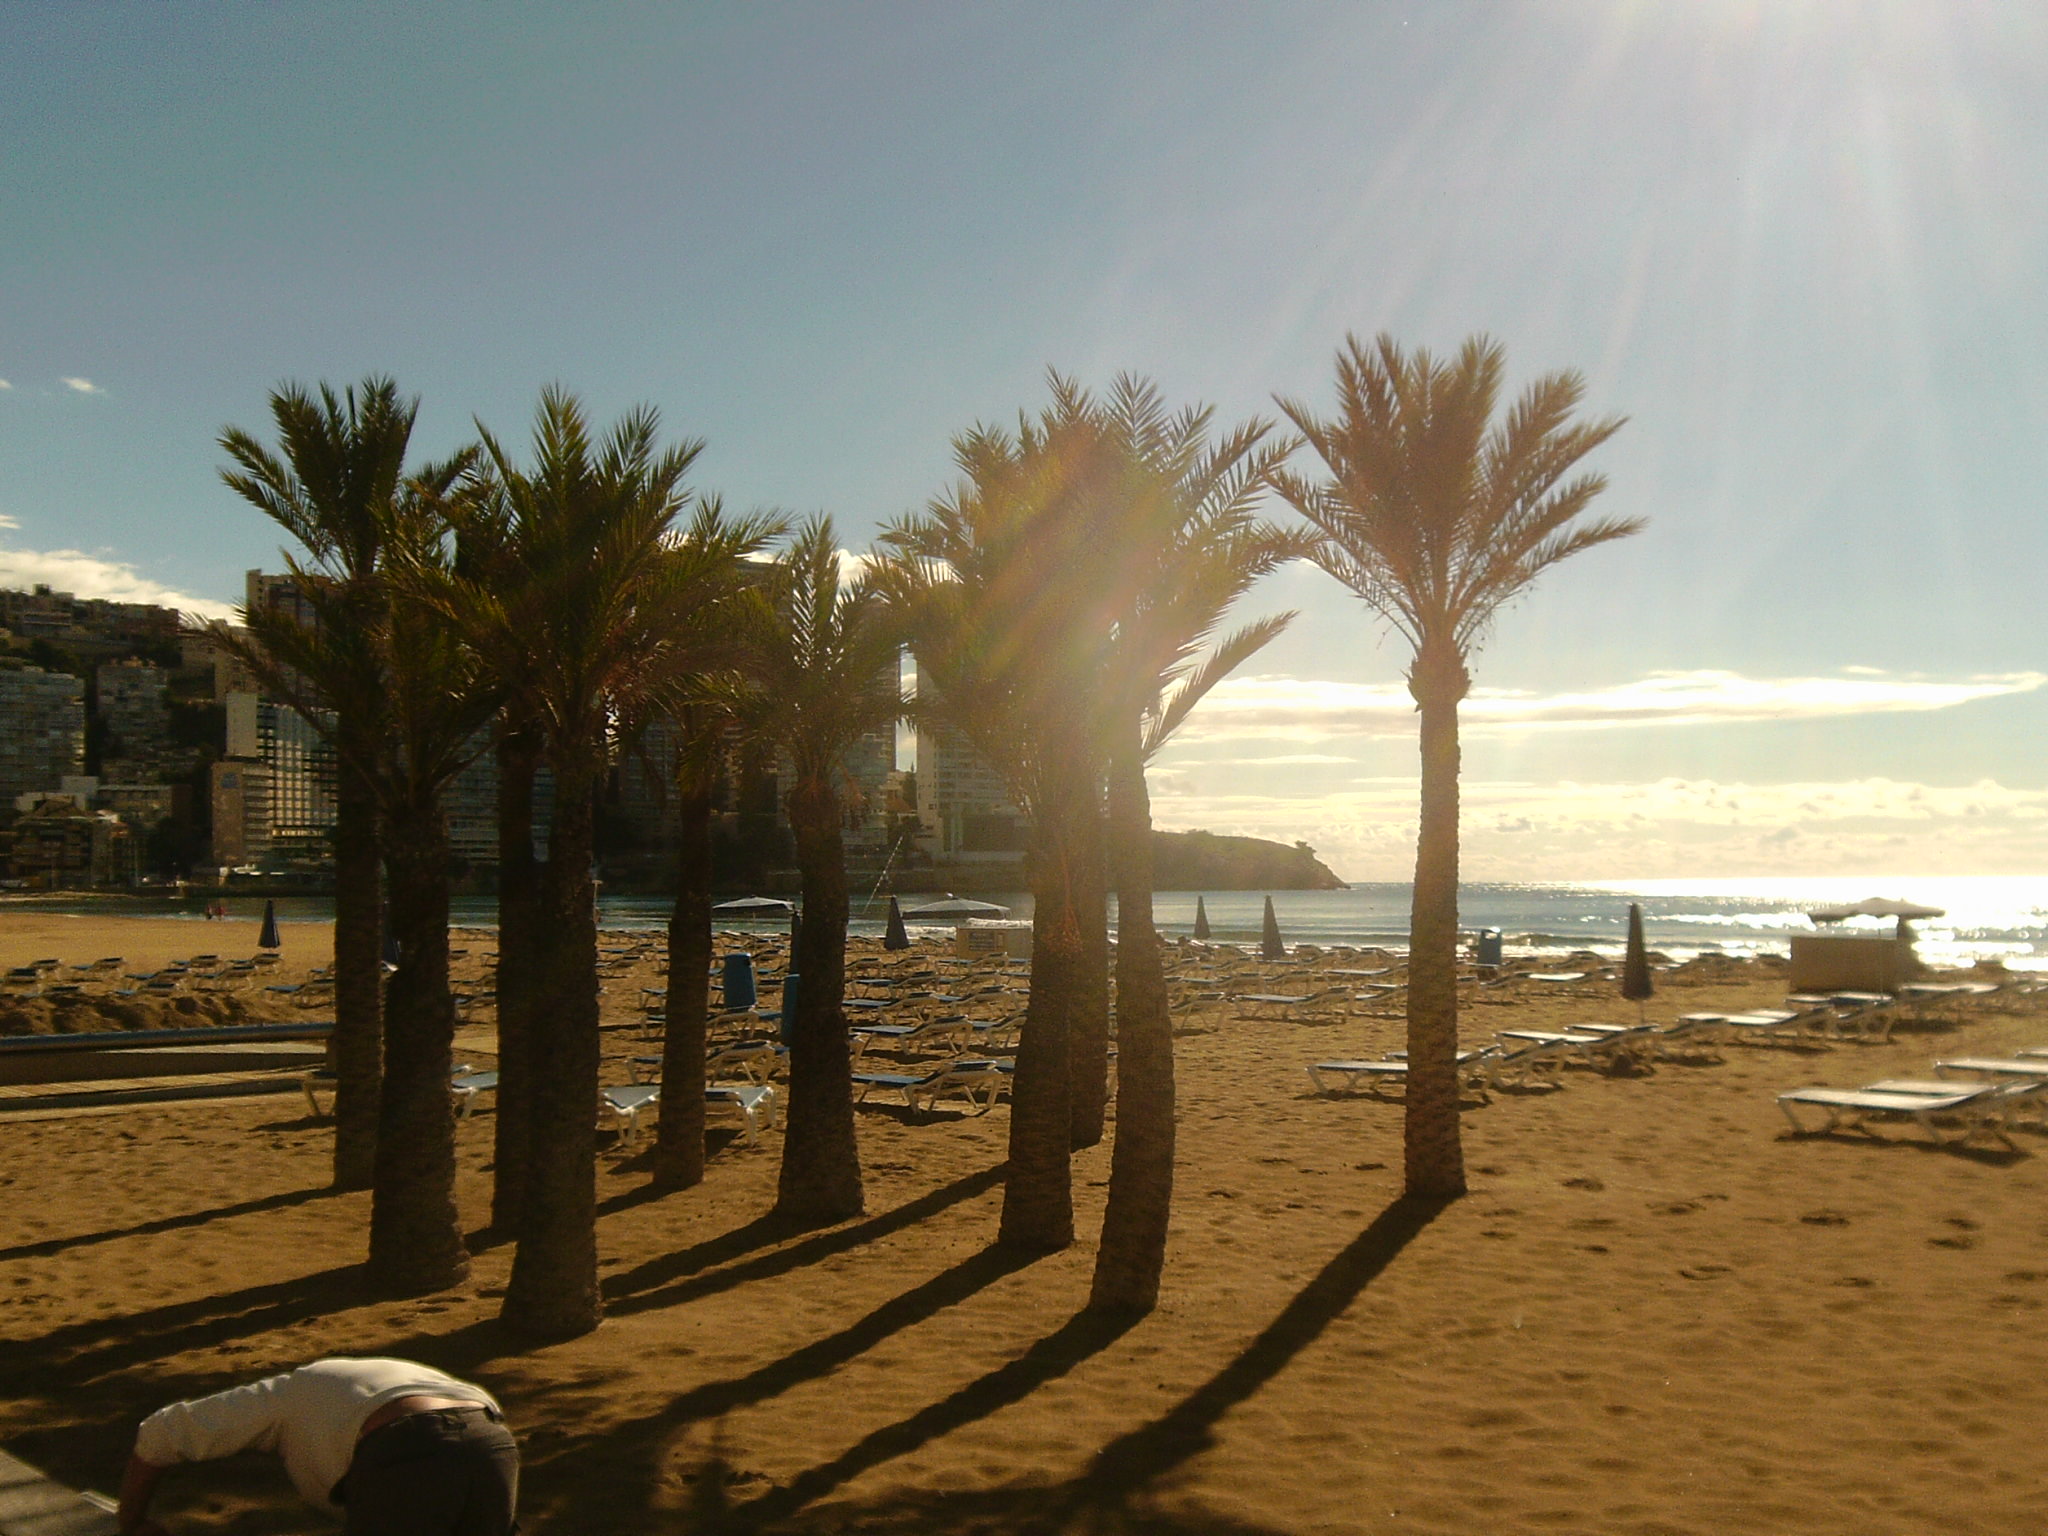 My photo - Palm Trees in Spain